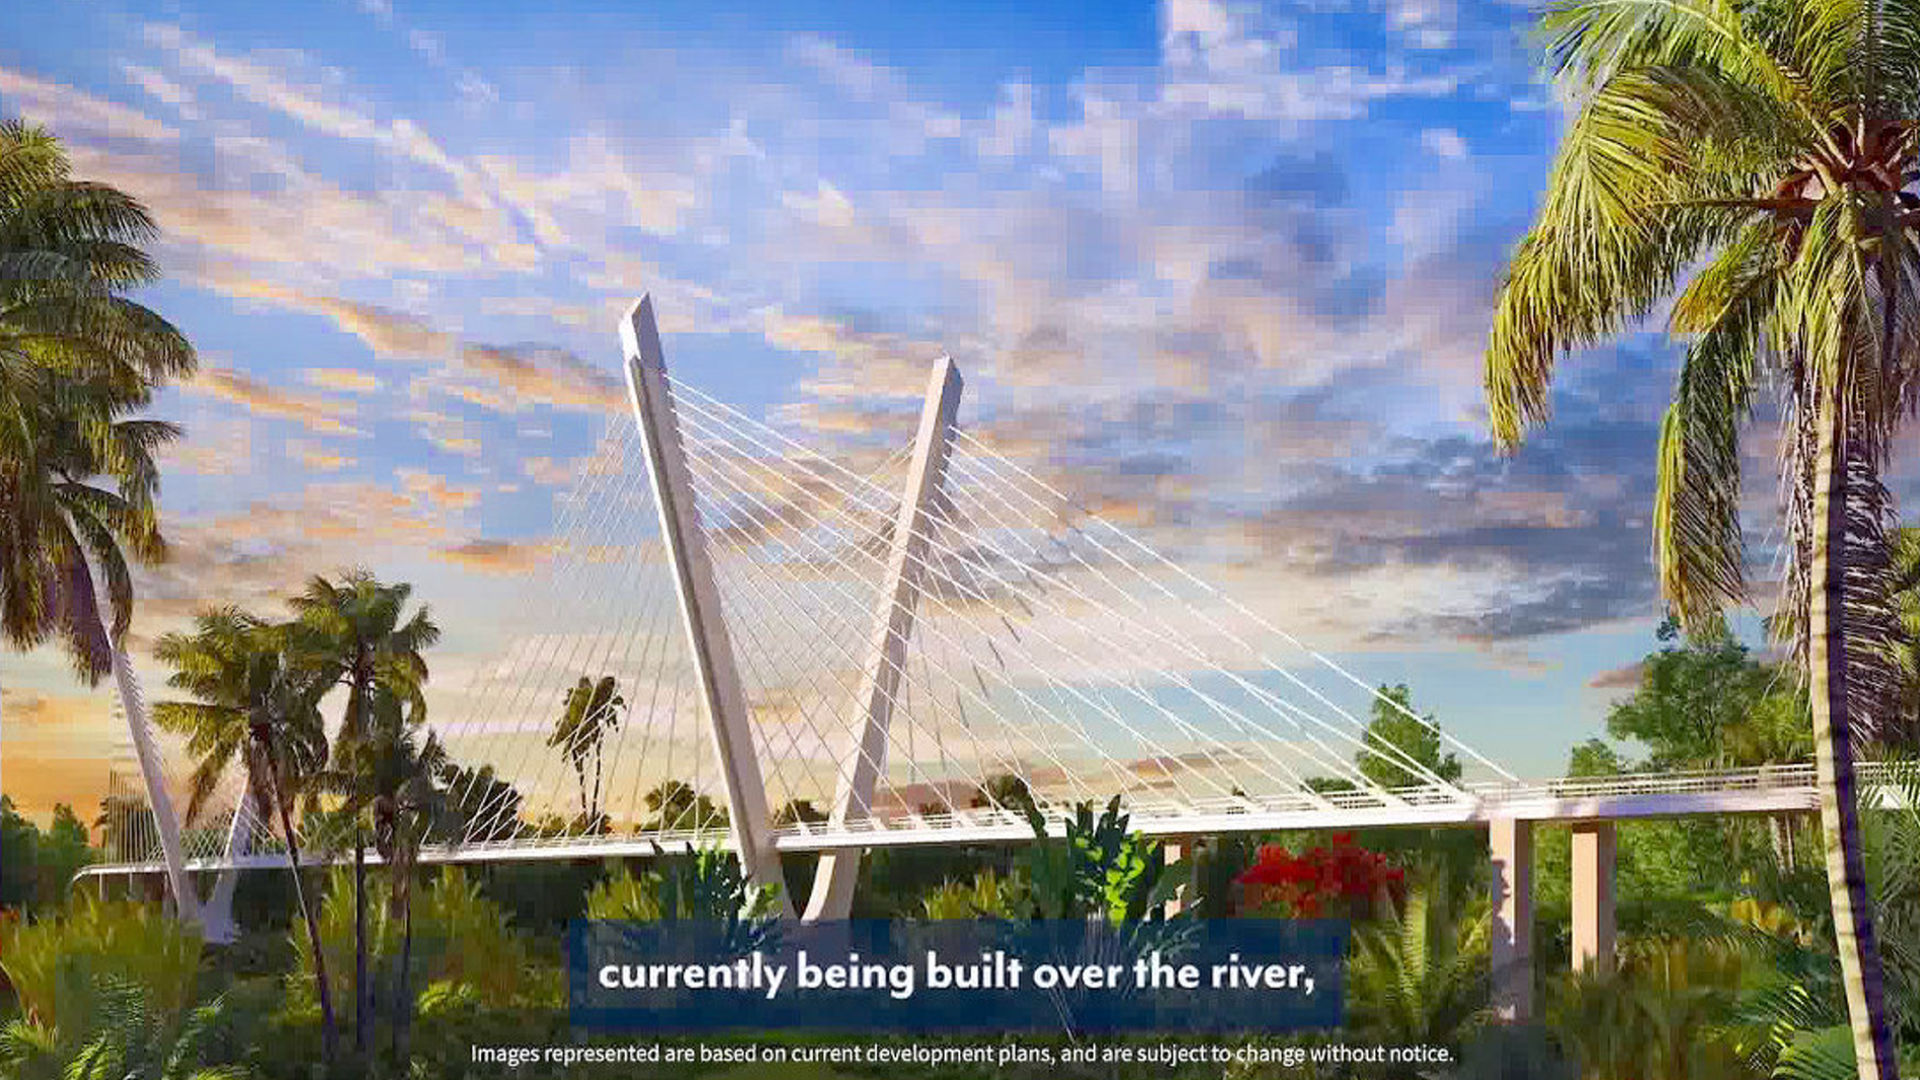 Architect's Rendering Of The Two Way Bridge